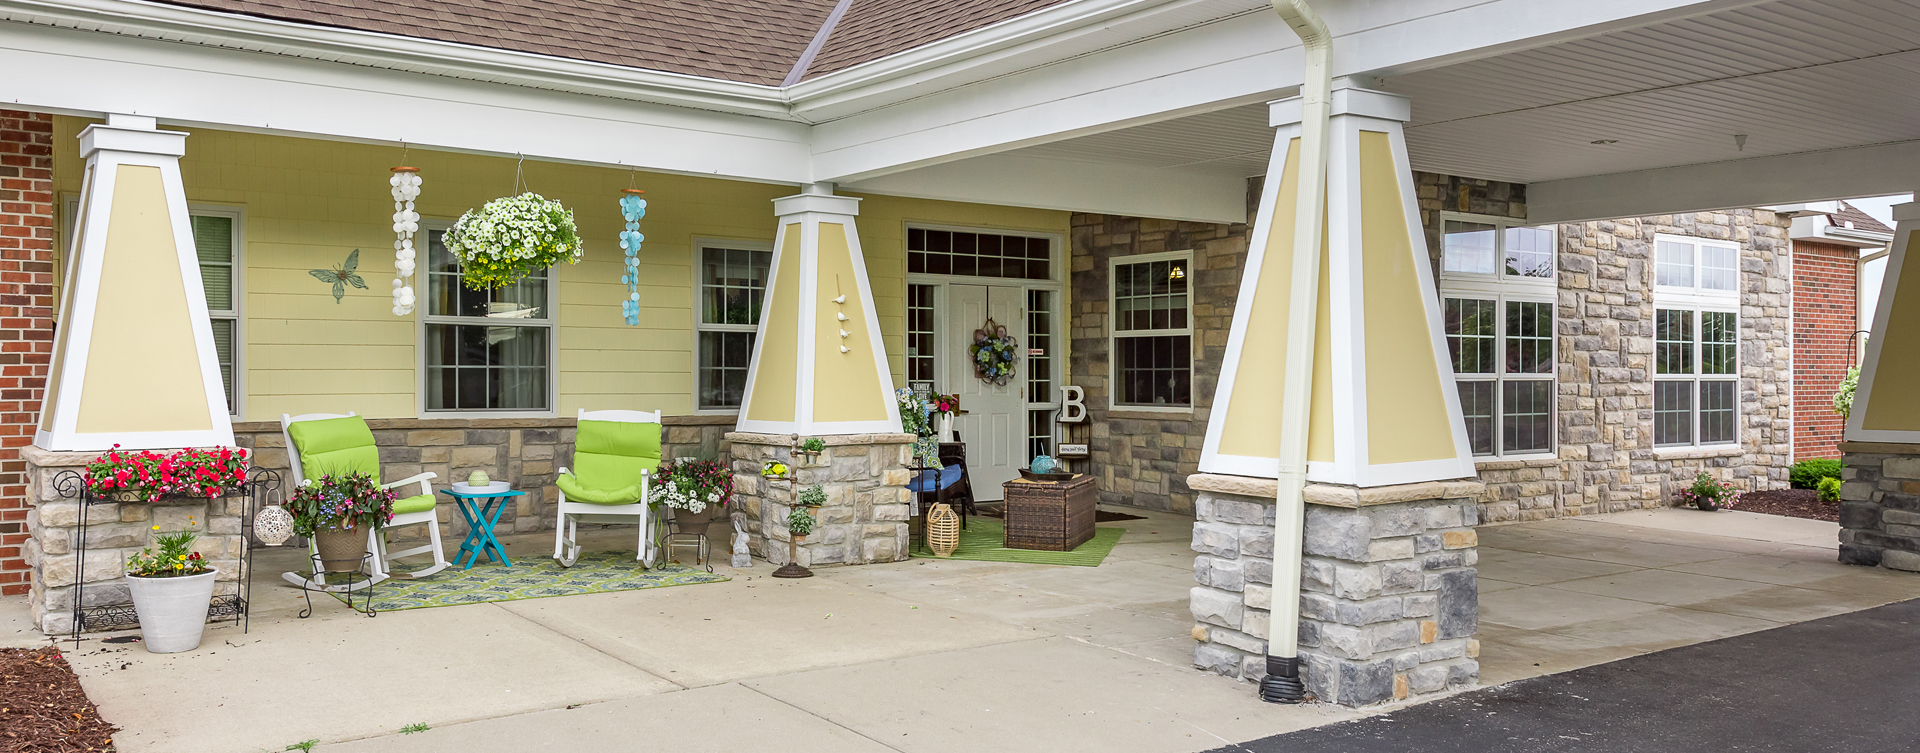 Relax in your favorite chair on the porch at Bickford of Saginaw Township